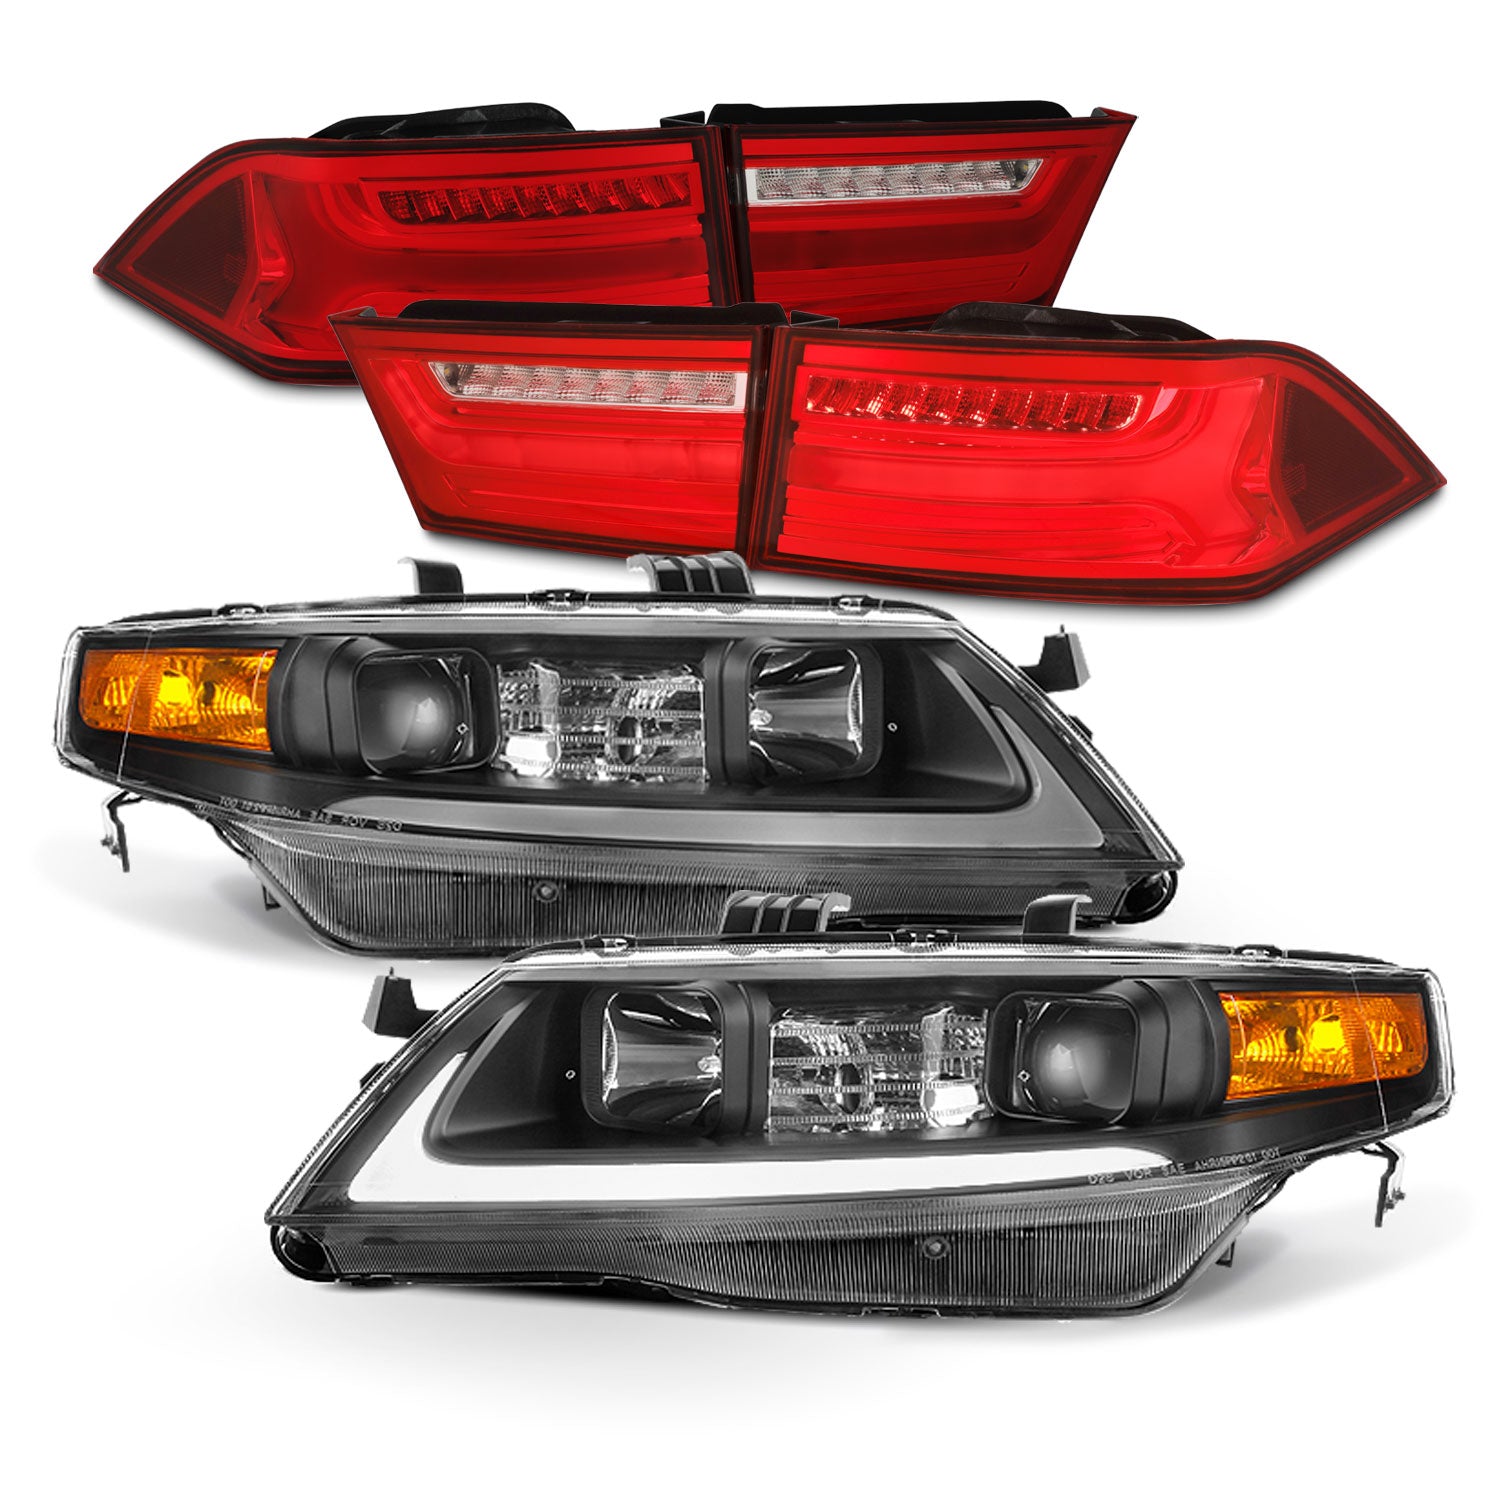 AKKON Fits 2004-2008 Acura TSX Light Bar DRL Projector Black Housing  Headlights LED Red Tail Lamps Combo